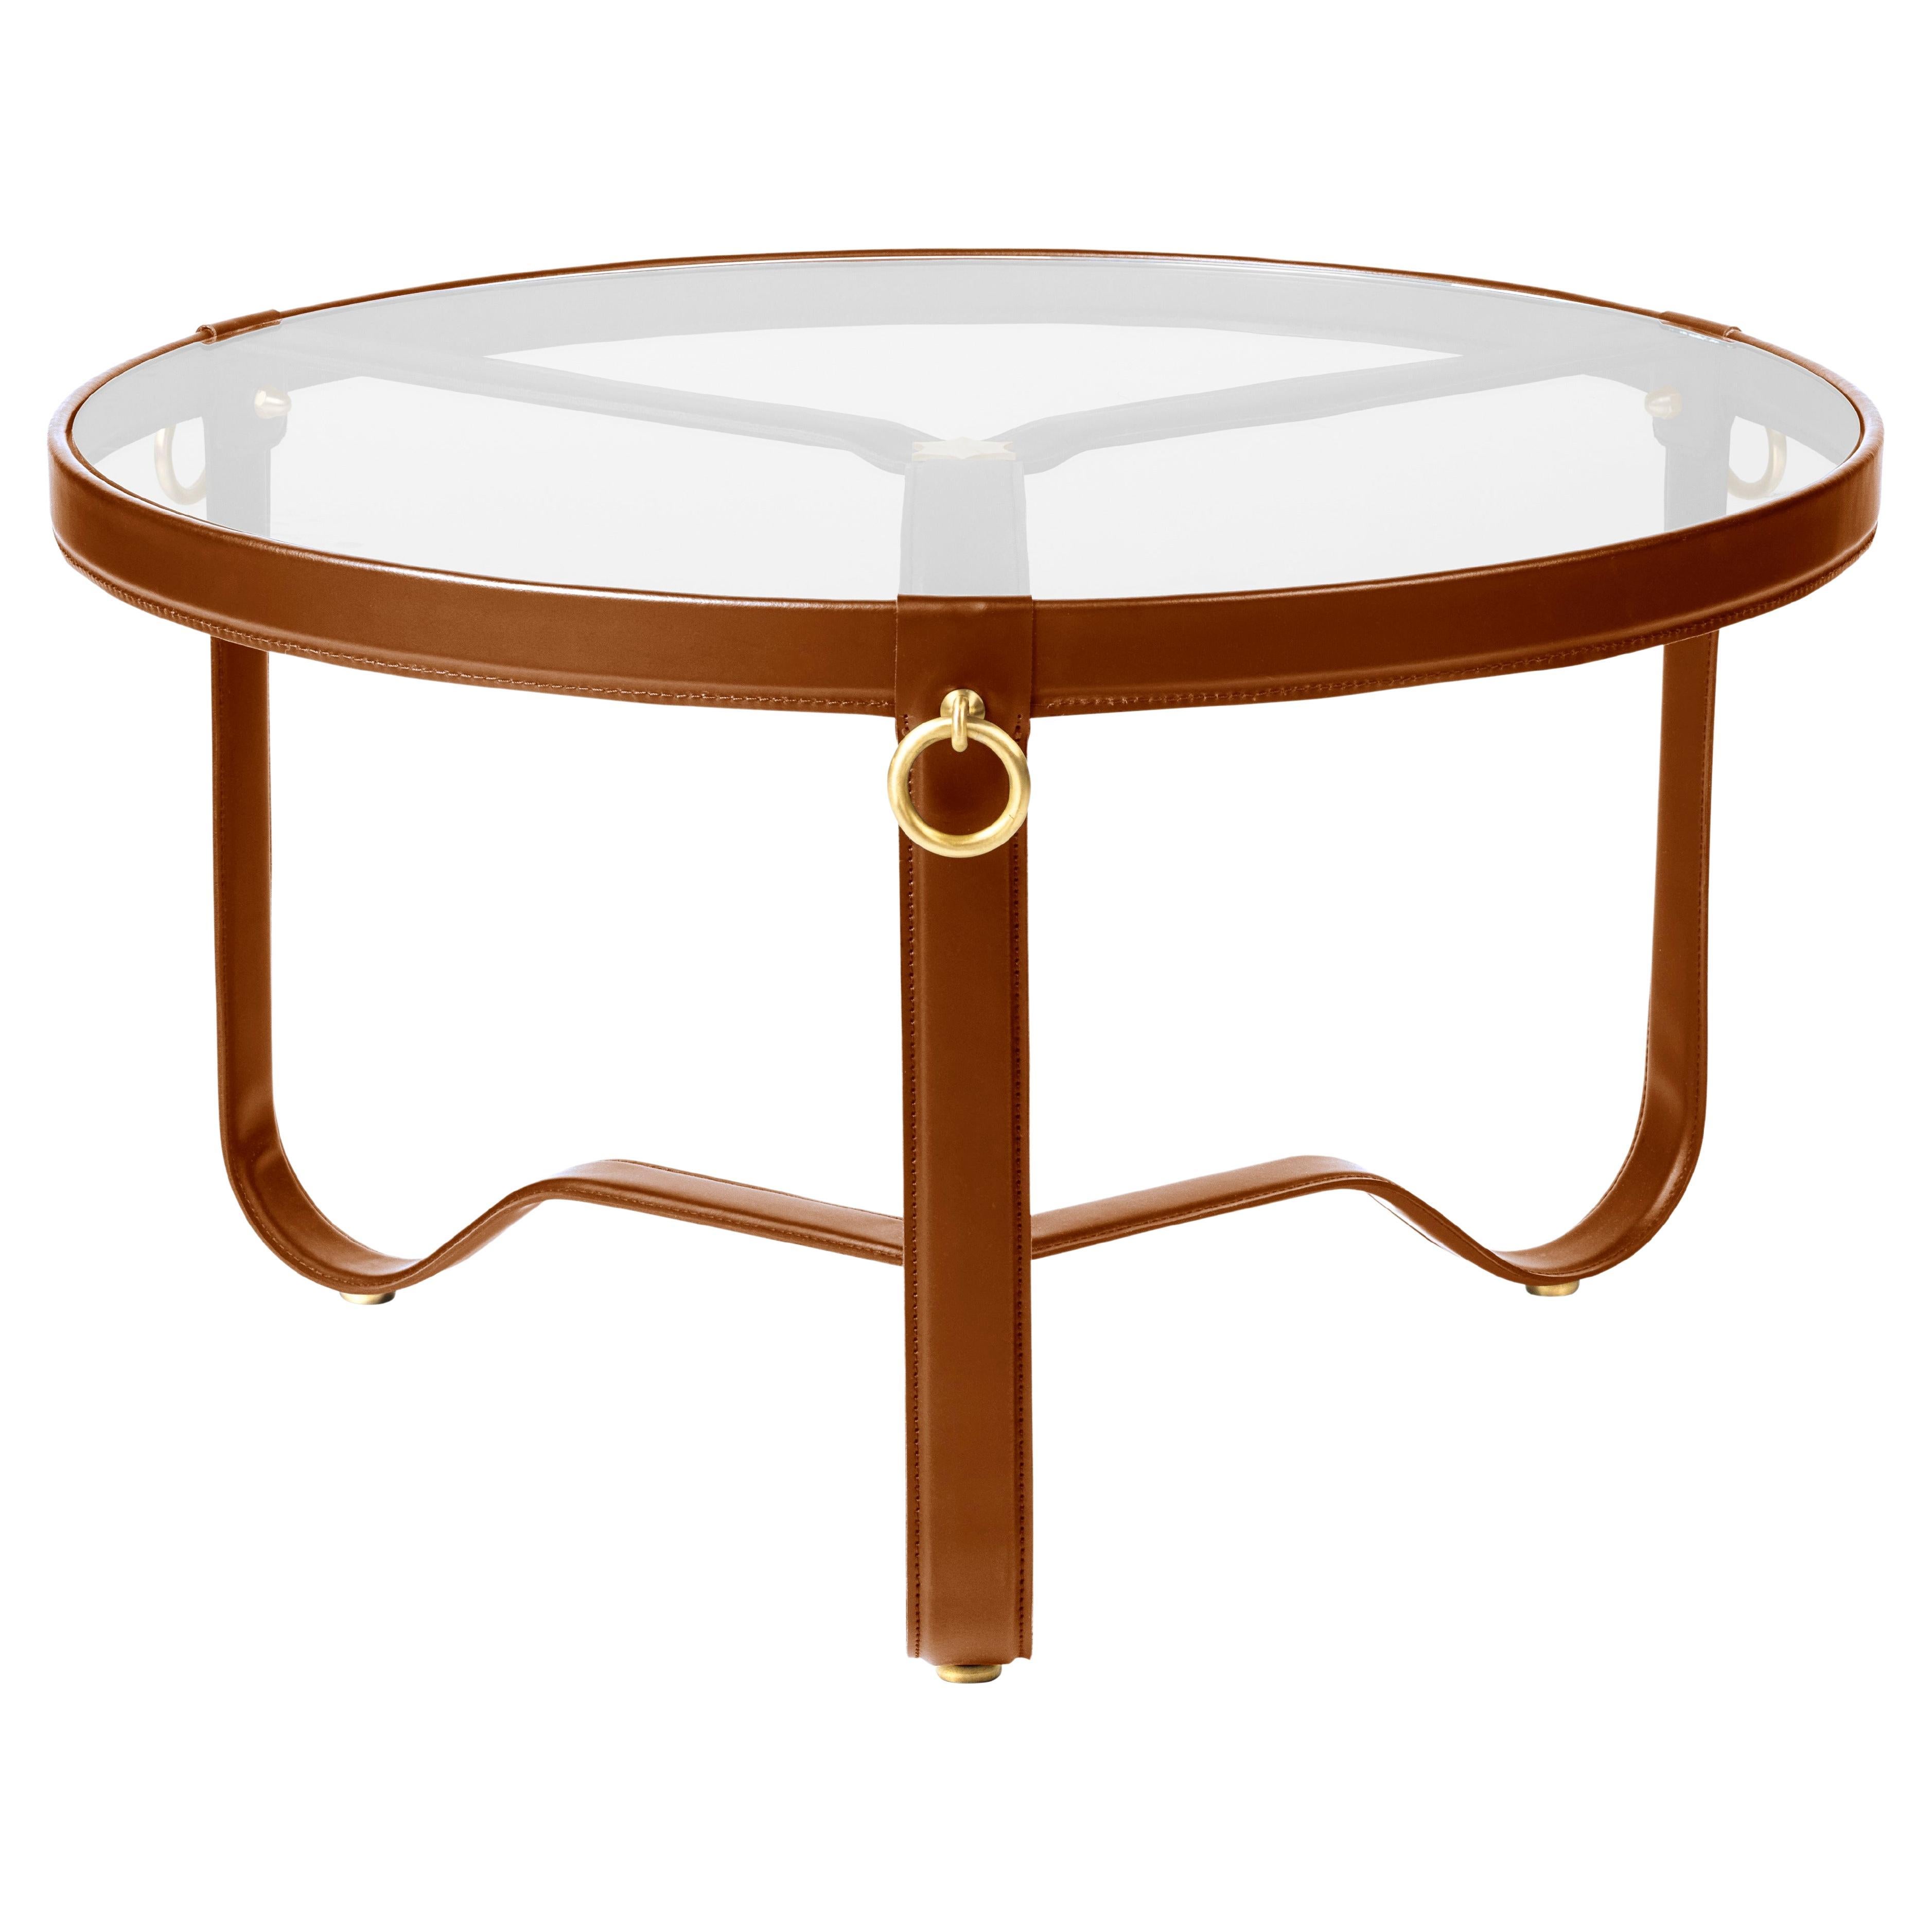 Jacques Adnet 'Circulaire' Glass and Brown Leather Coffee or Side Table for GUBI